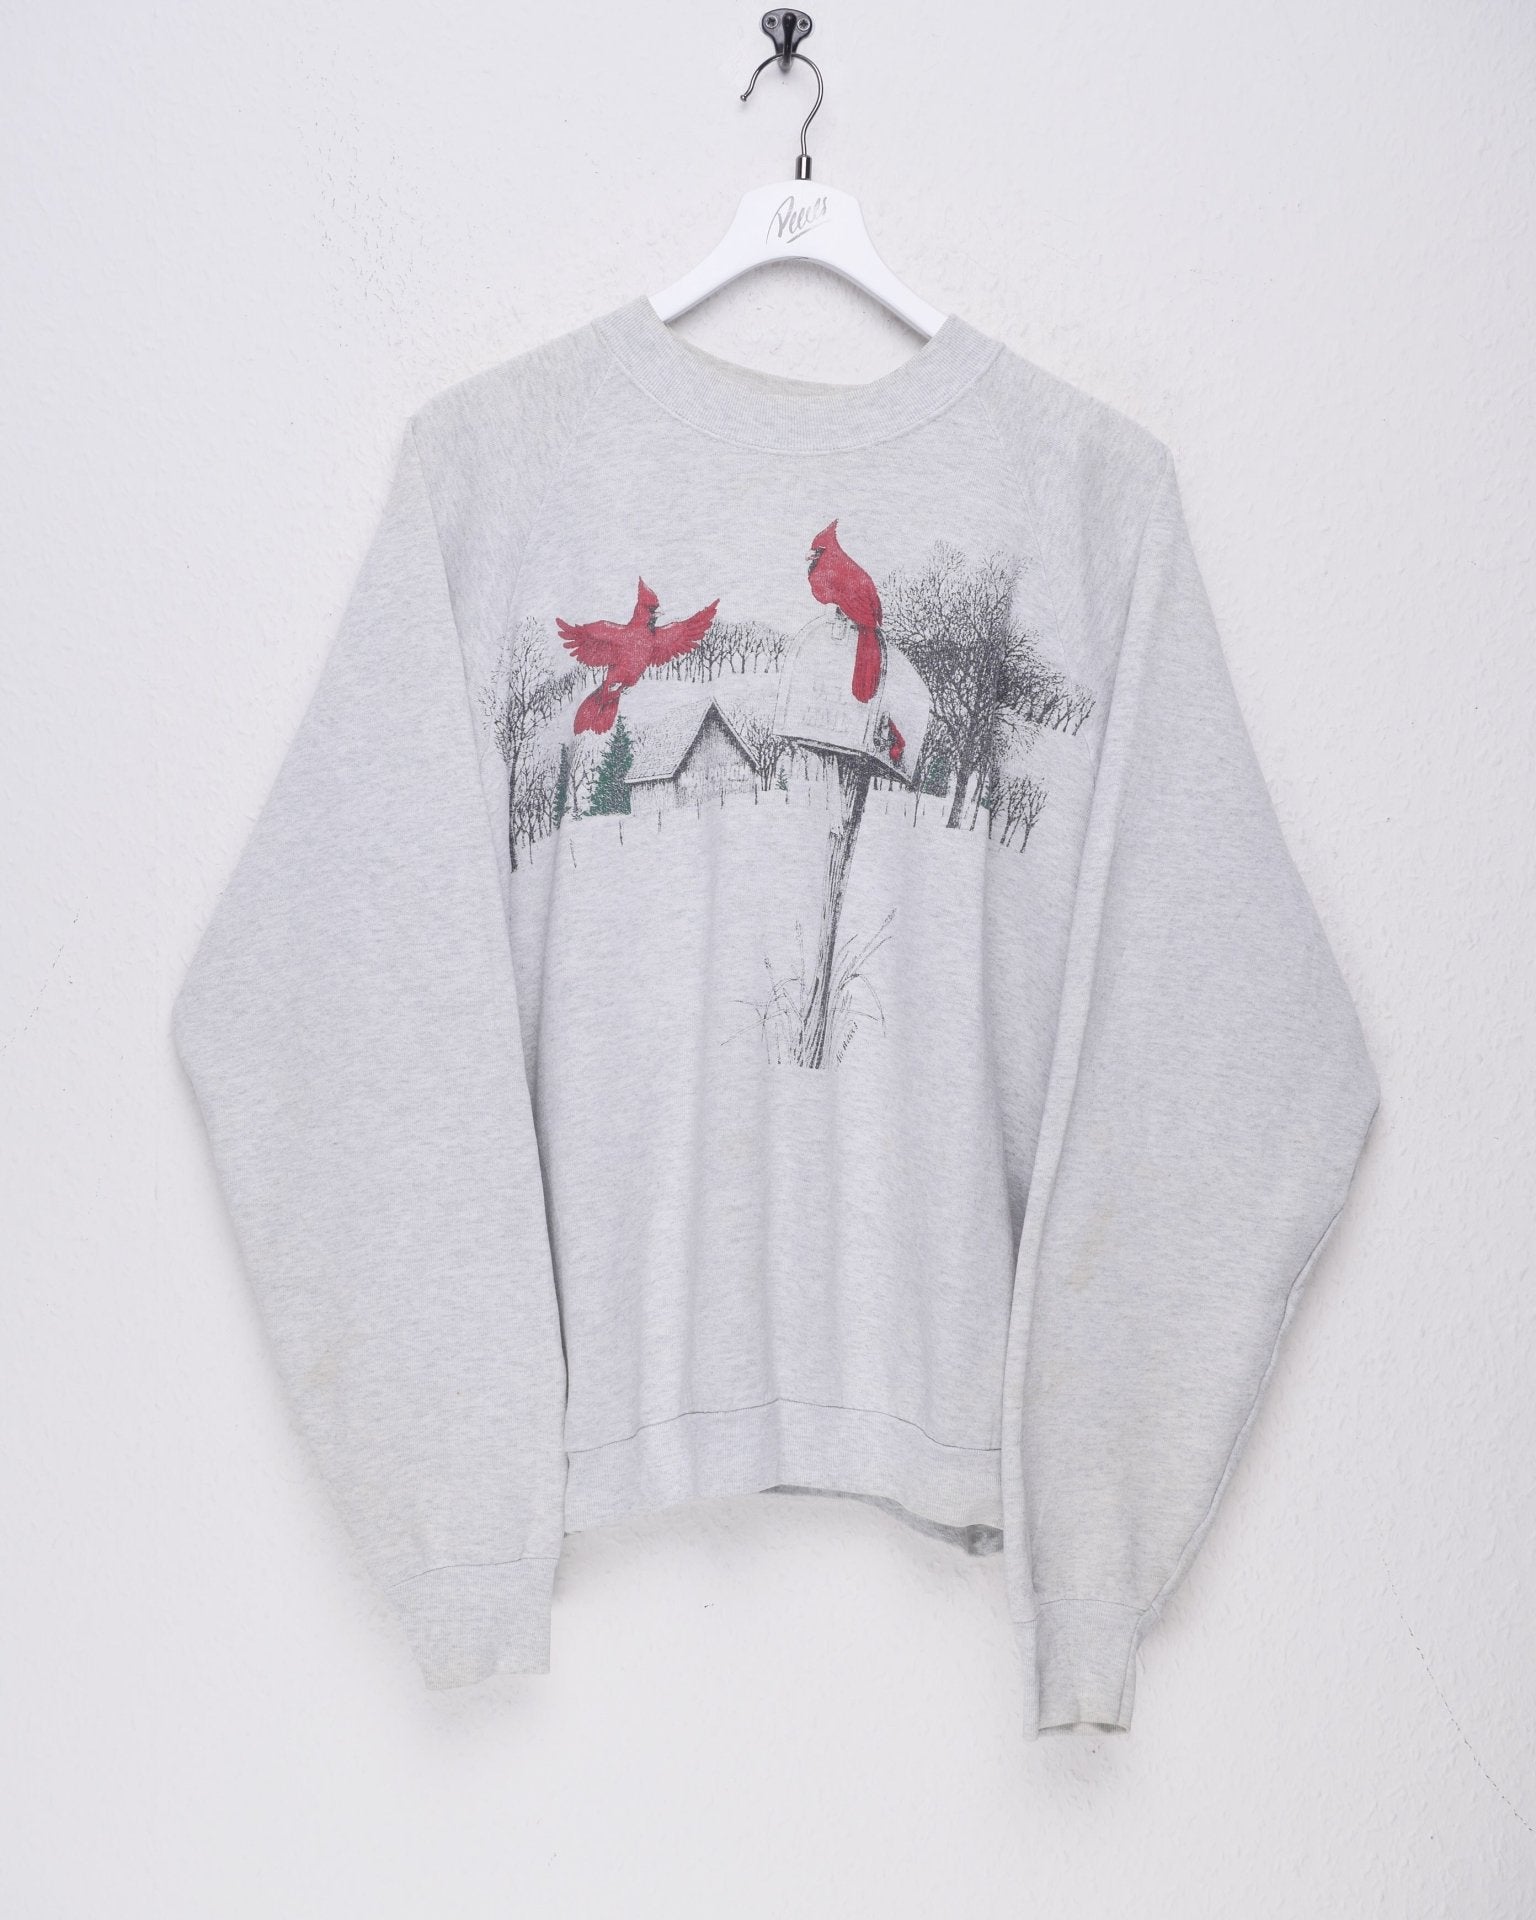 Vintage printed Graphic Sweater - Peeces